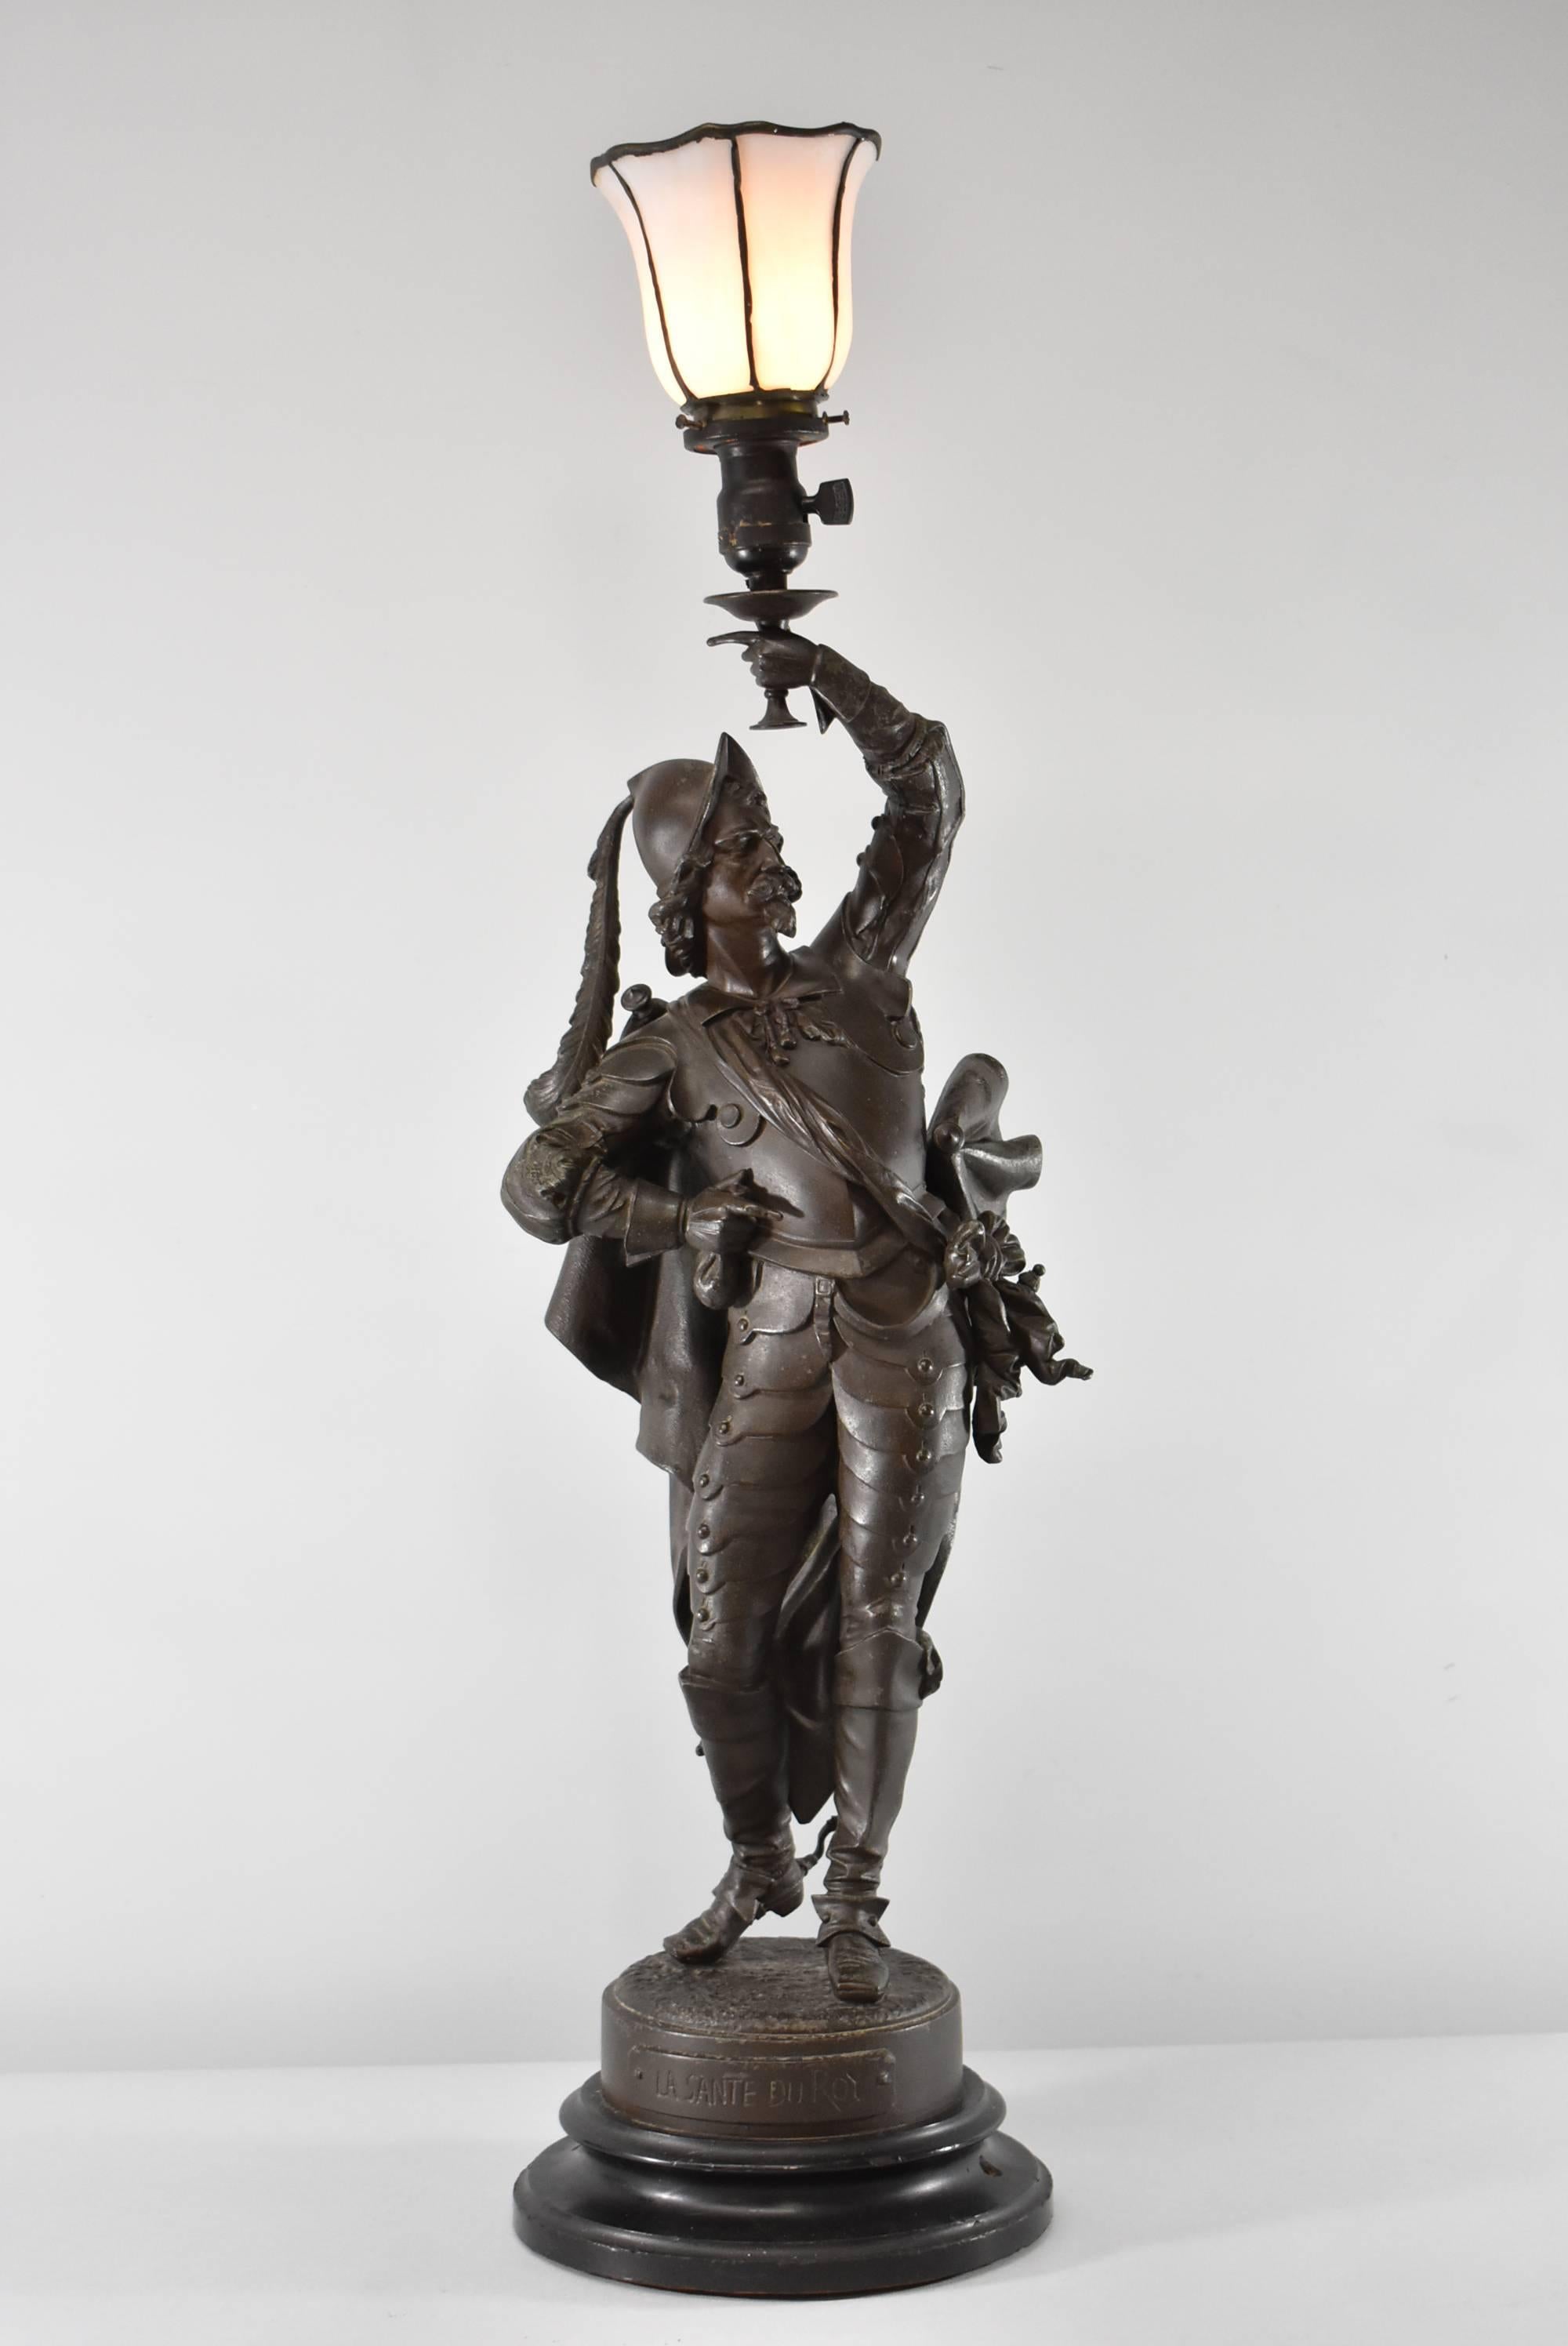 An exceptional antique newel post lamp by Philippe Poitevin, "La Sante Du Roy". A French artist that lived between 1831-1907. Artist signed on the base and features a french musketeer toasting to the 